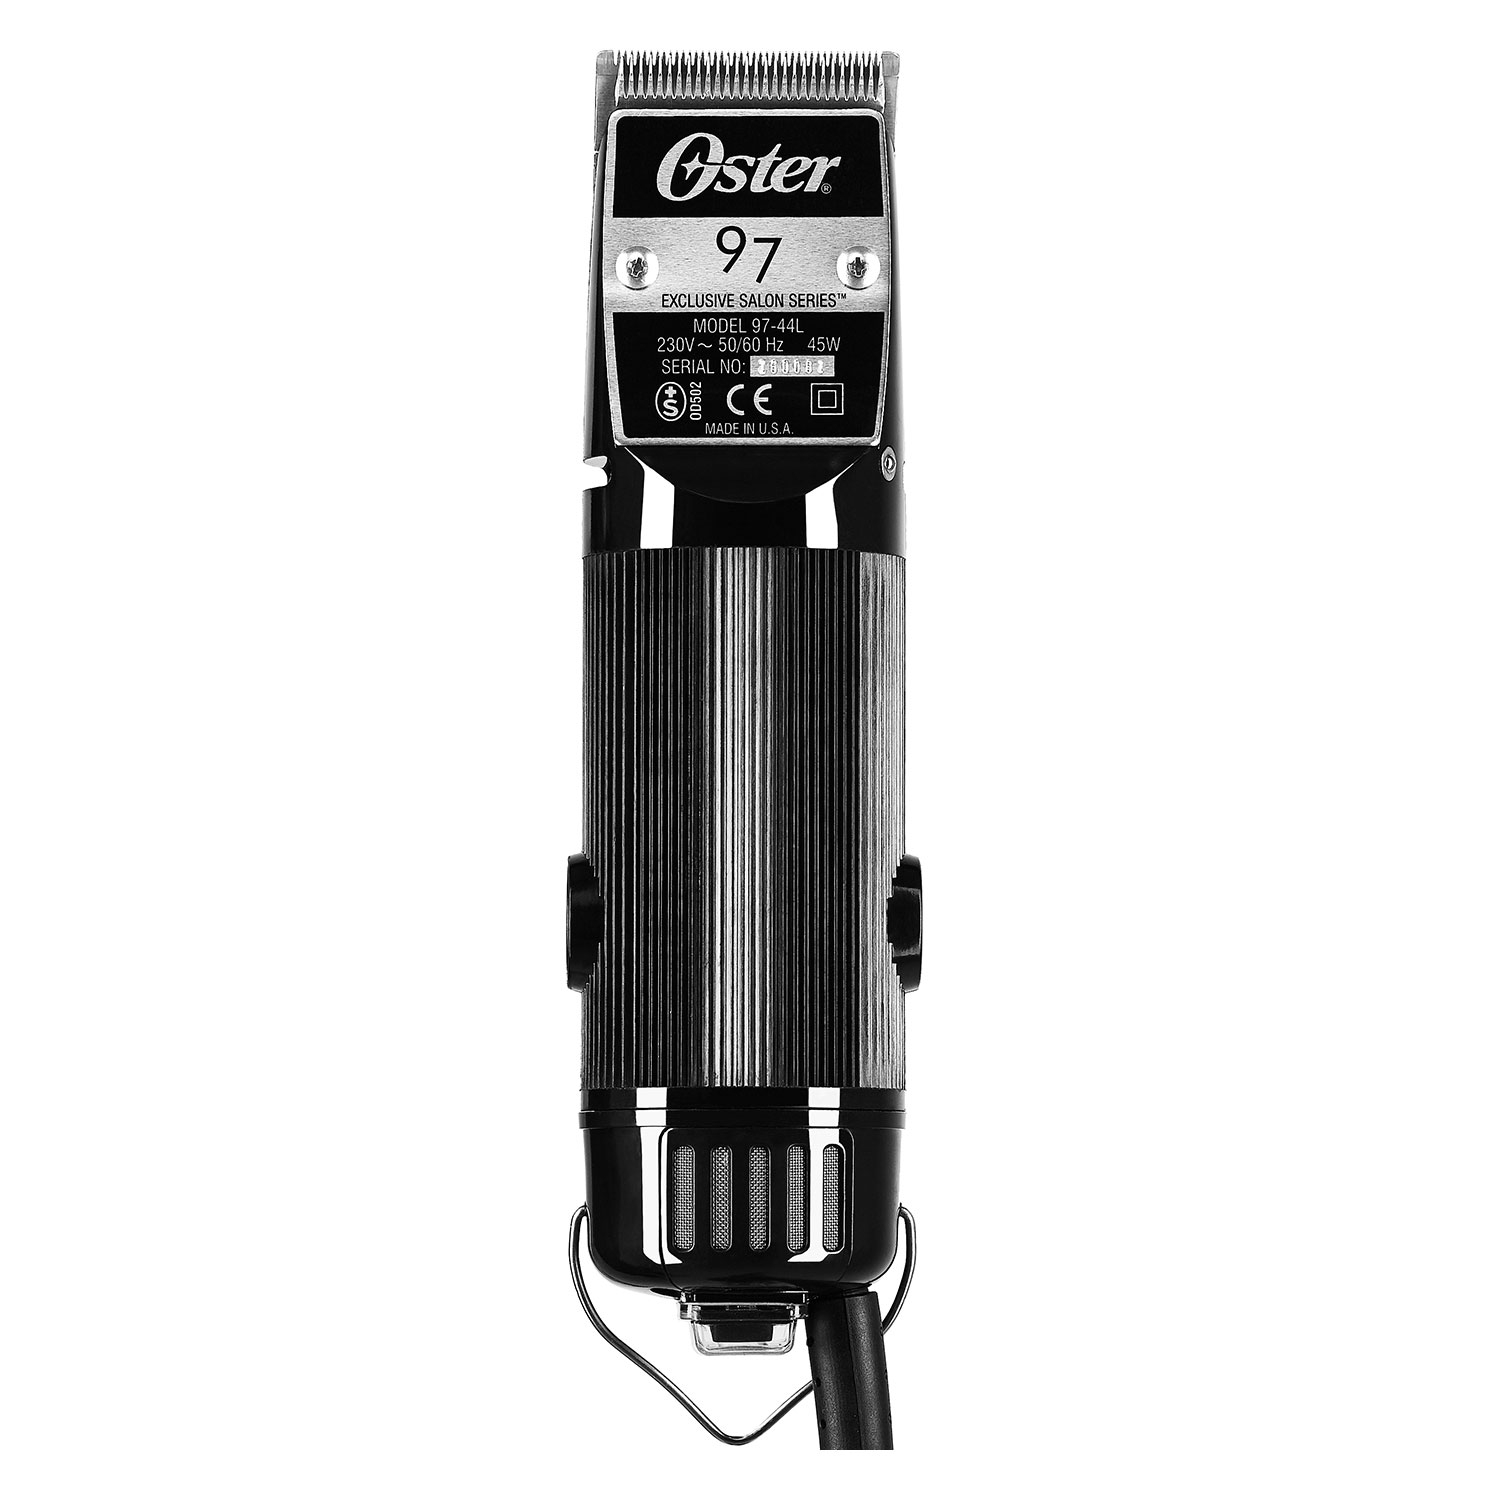 Product image from Oster - Haarschneide-Maschine 97-44